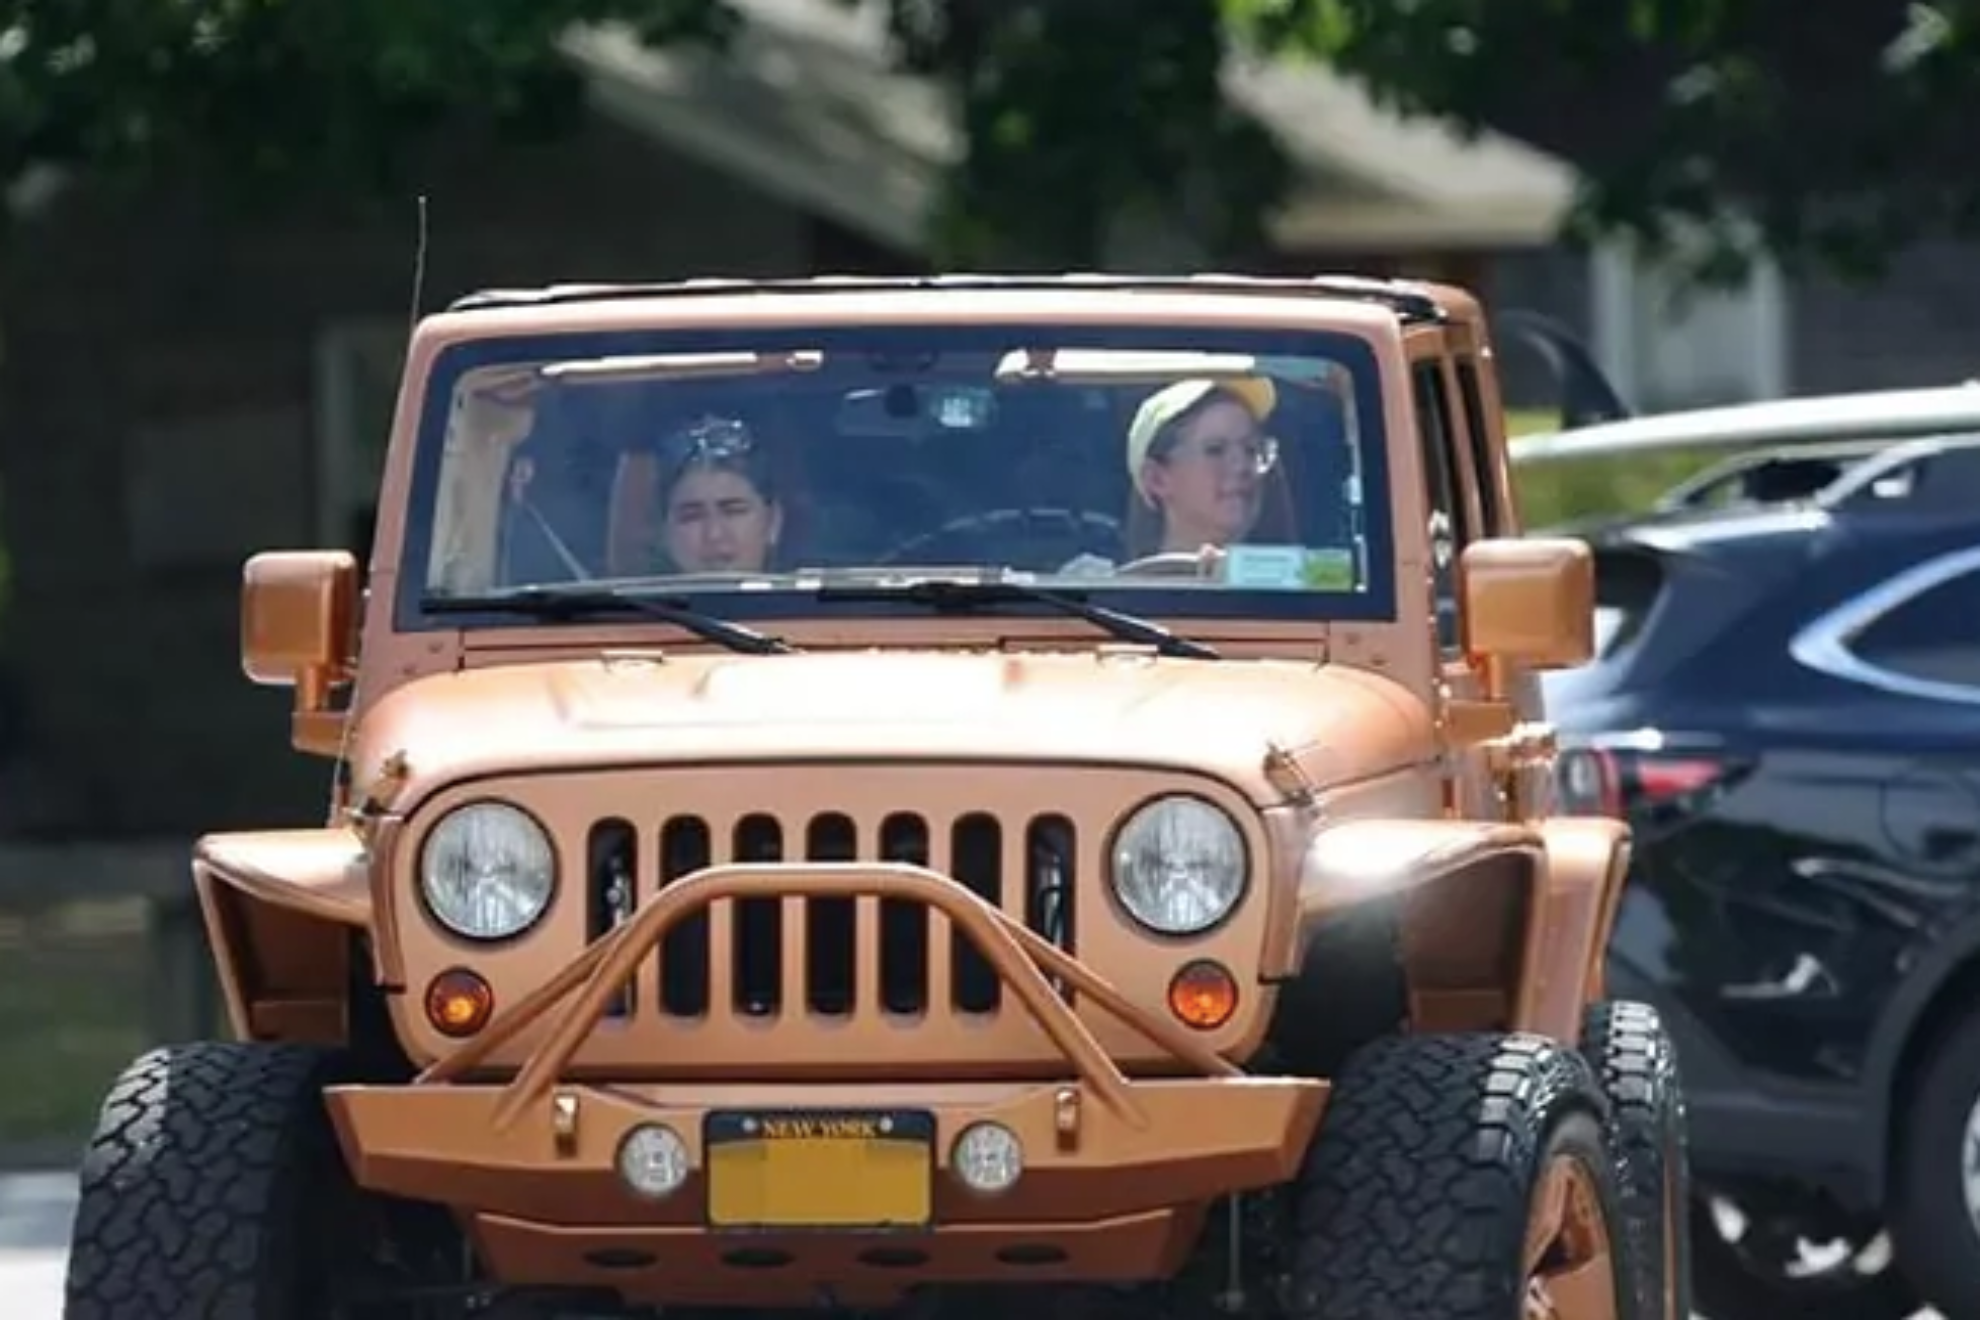 The impressive 4x4 jeep that Ben Affleck has given to his daughter Violet, 17